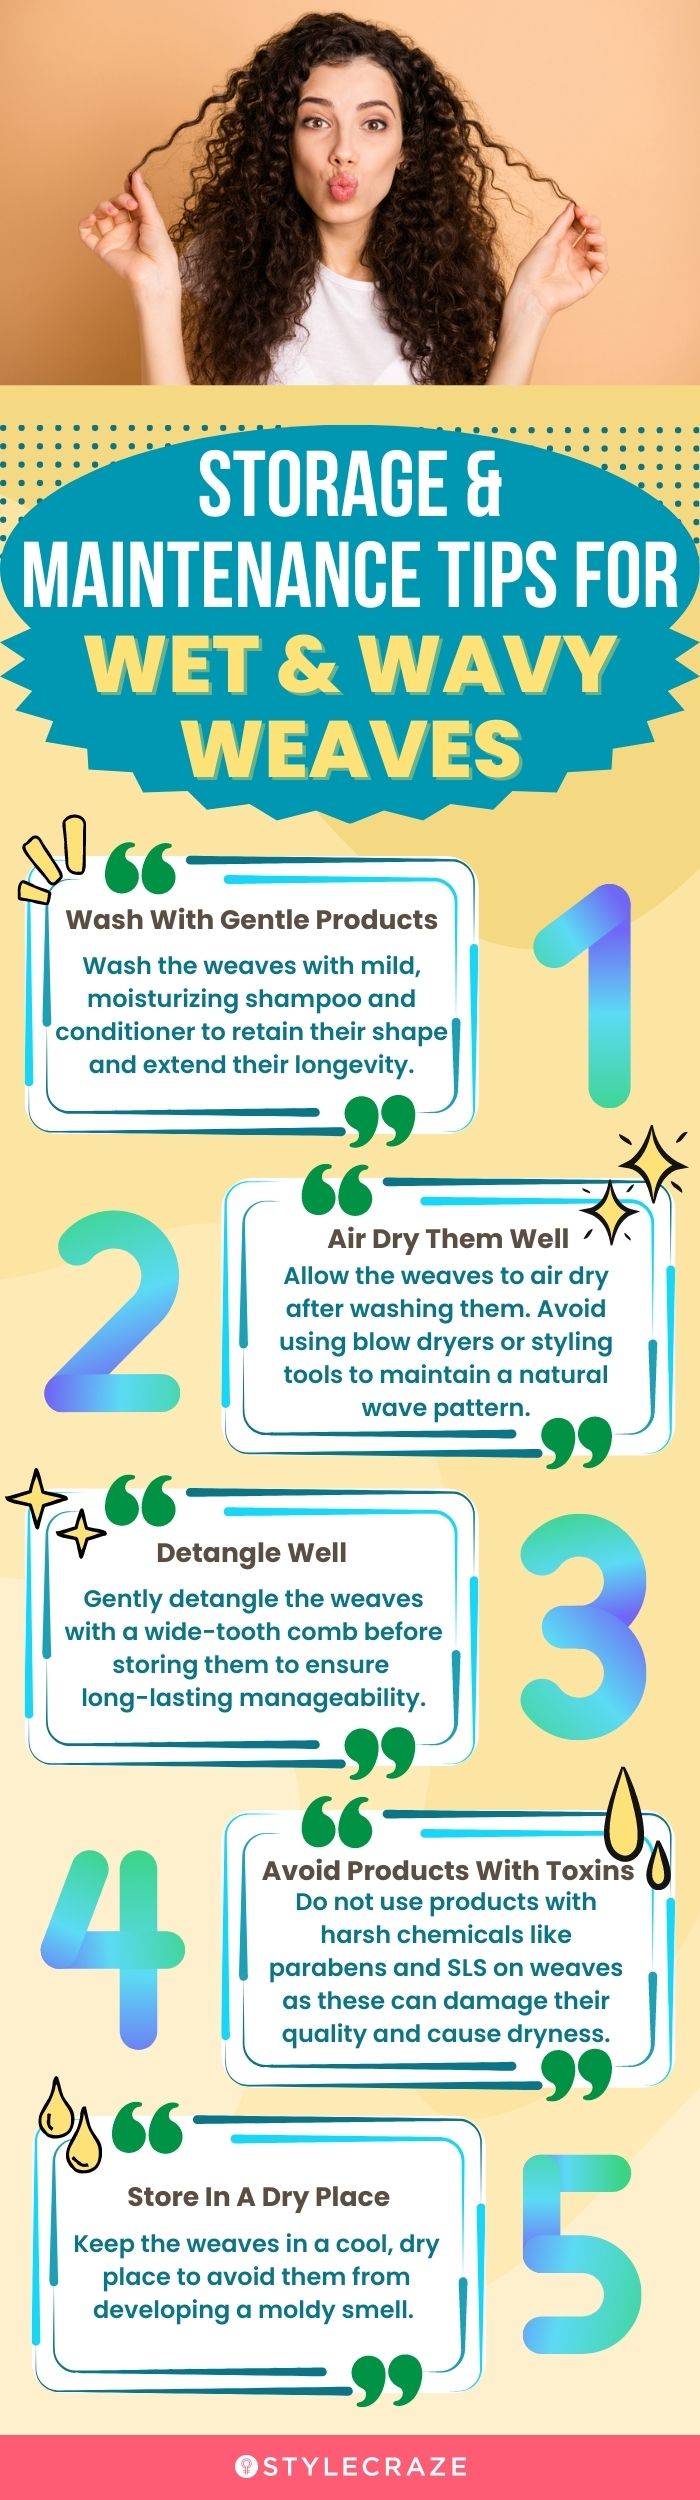 Storage & Maintenance Tips For Wet & Wavy Weaves (infographic)